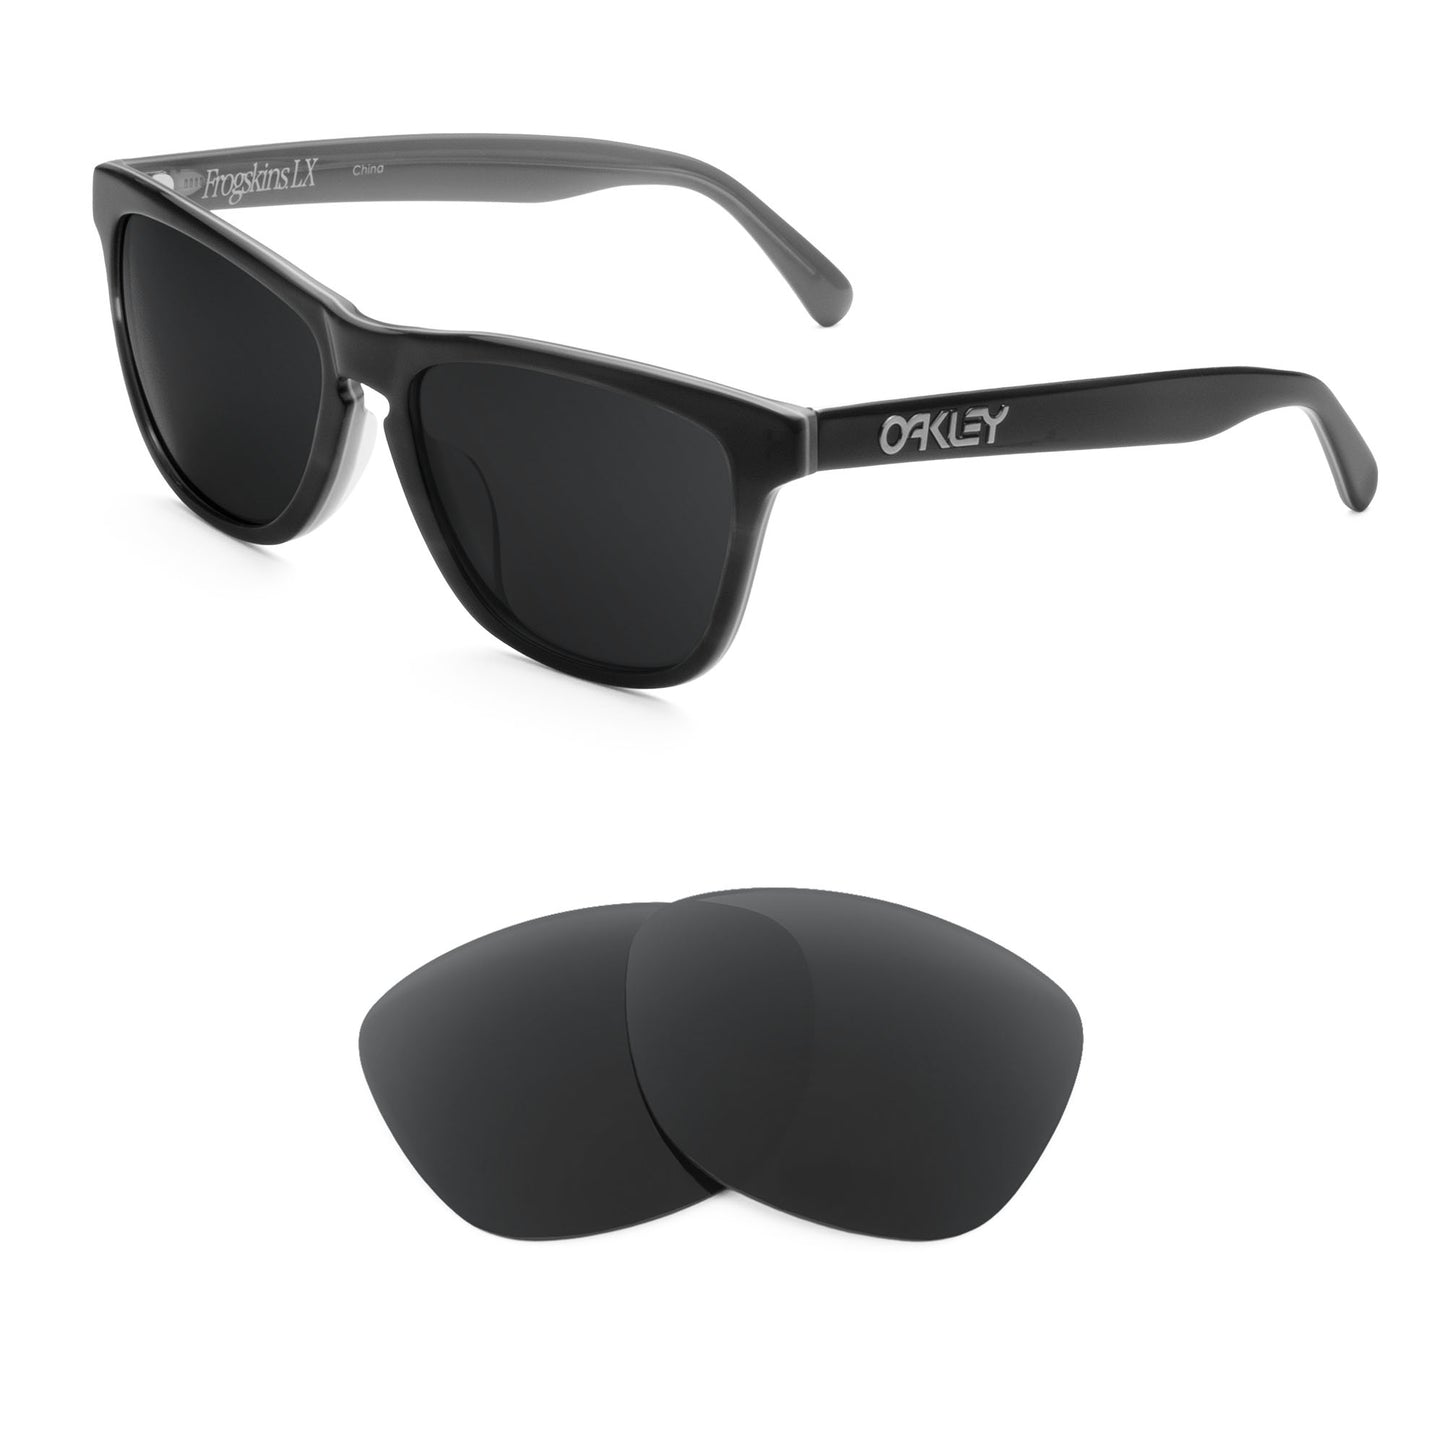 Oakley Frogskins LX (Low Bridge Fit) sunglasses with replacement lenses